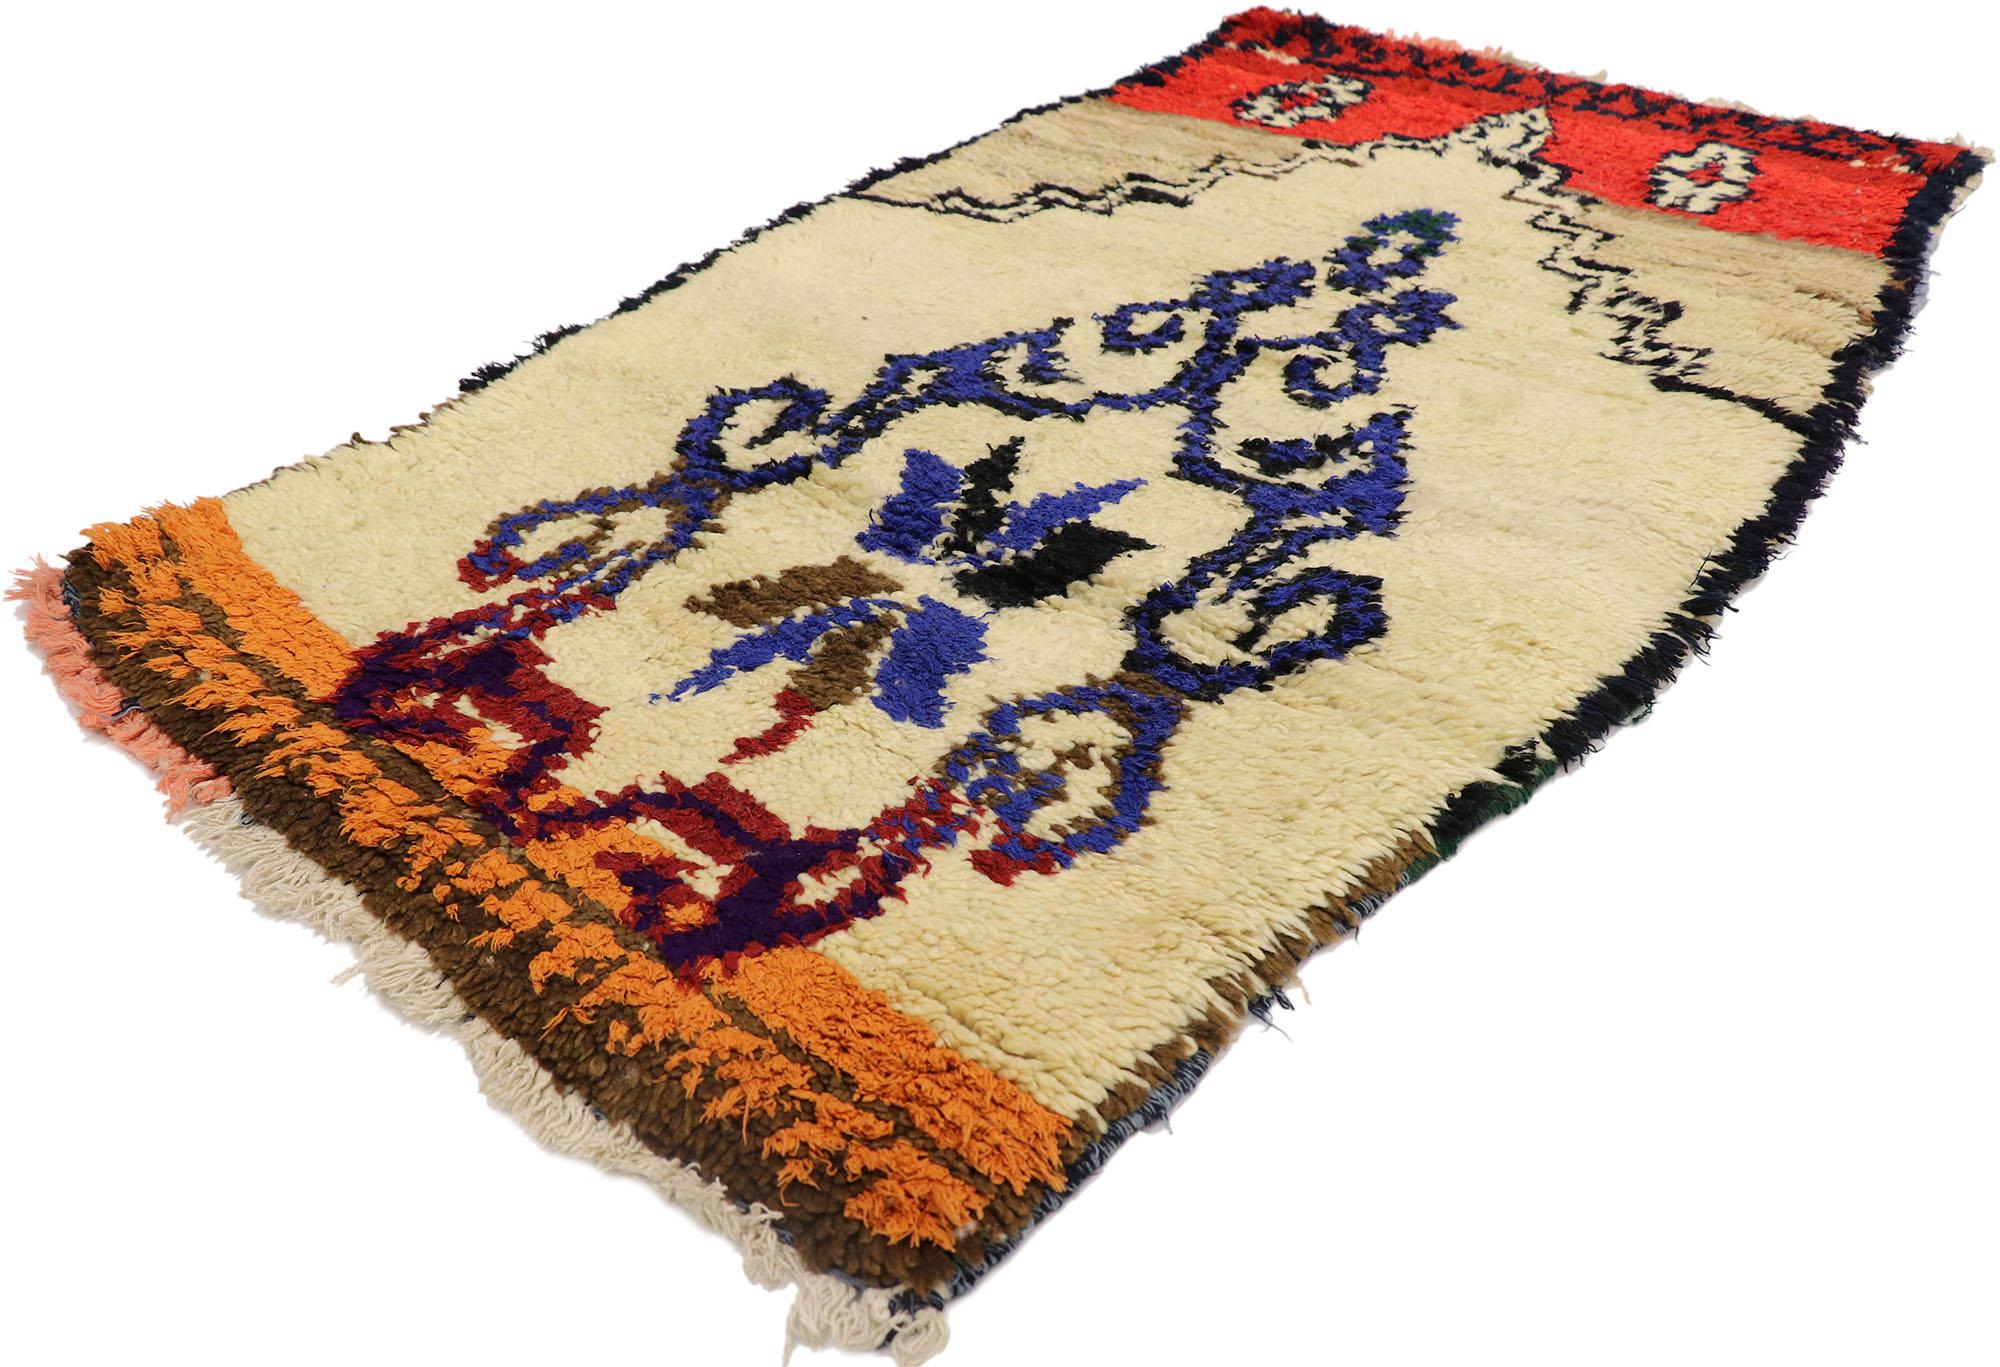 21576 Vintage Berber Moroccan Azilal rug with Bohemian Tribal Style 02'08 x 04'10. Showcasing a bold expressive tribal design, incredible detail and texture, this hand knotted wool vintage Berber Moroccan Azilal rug is a captivating vision of woven